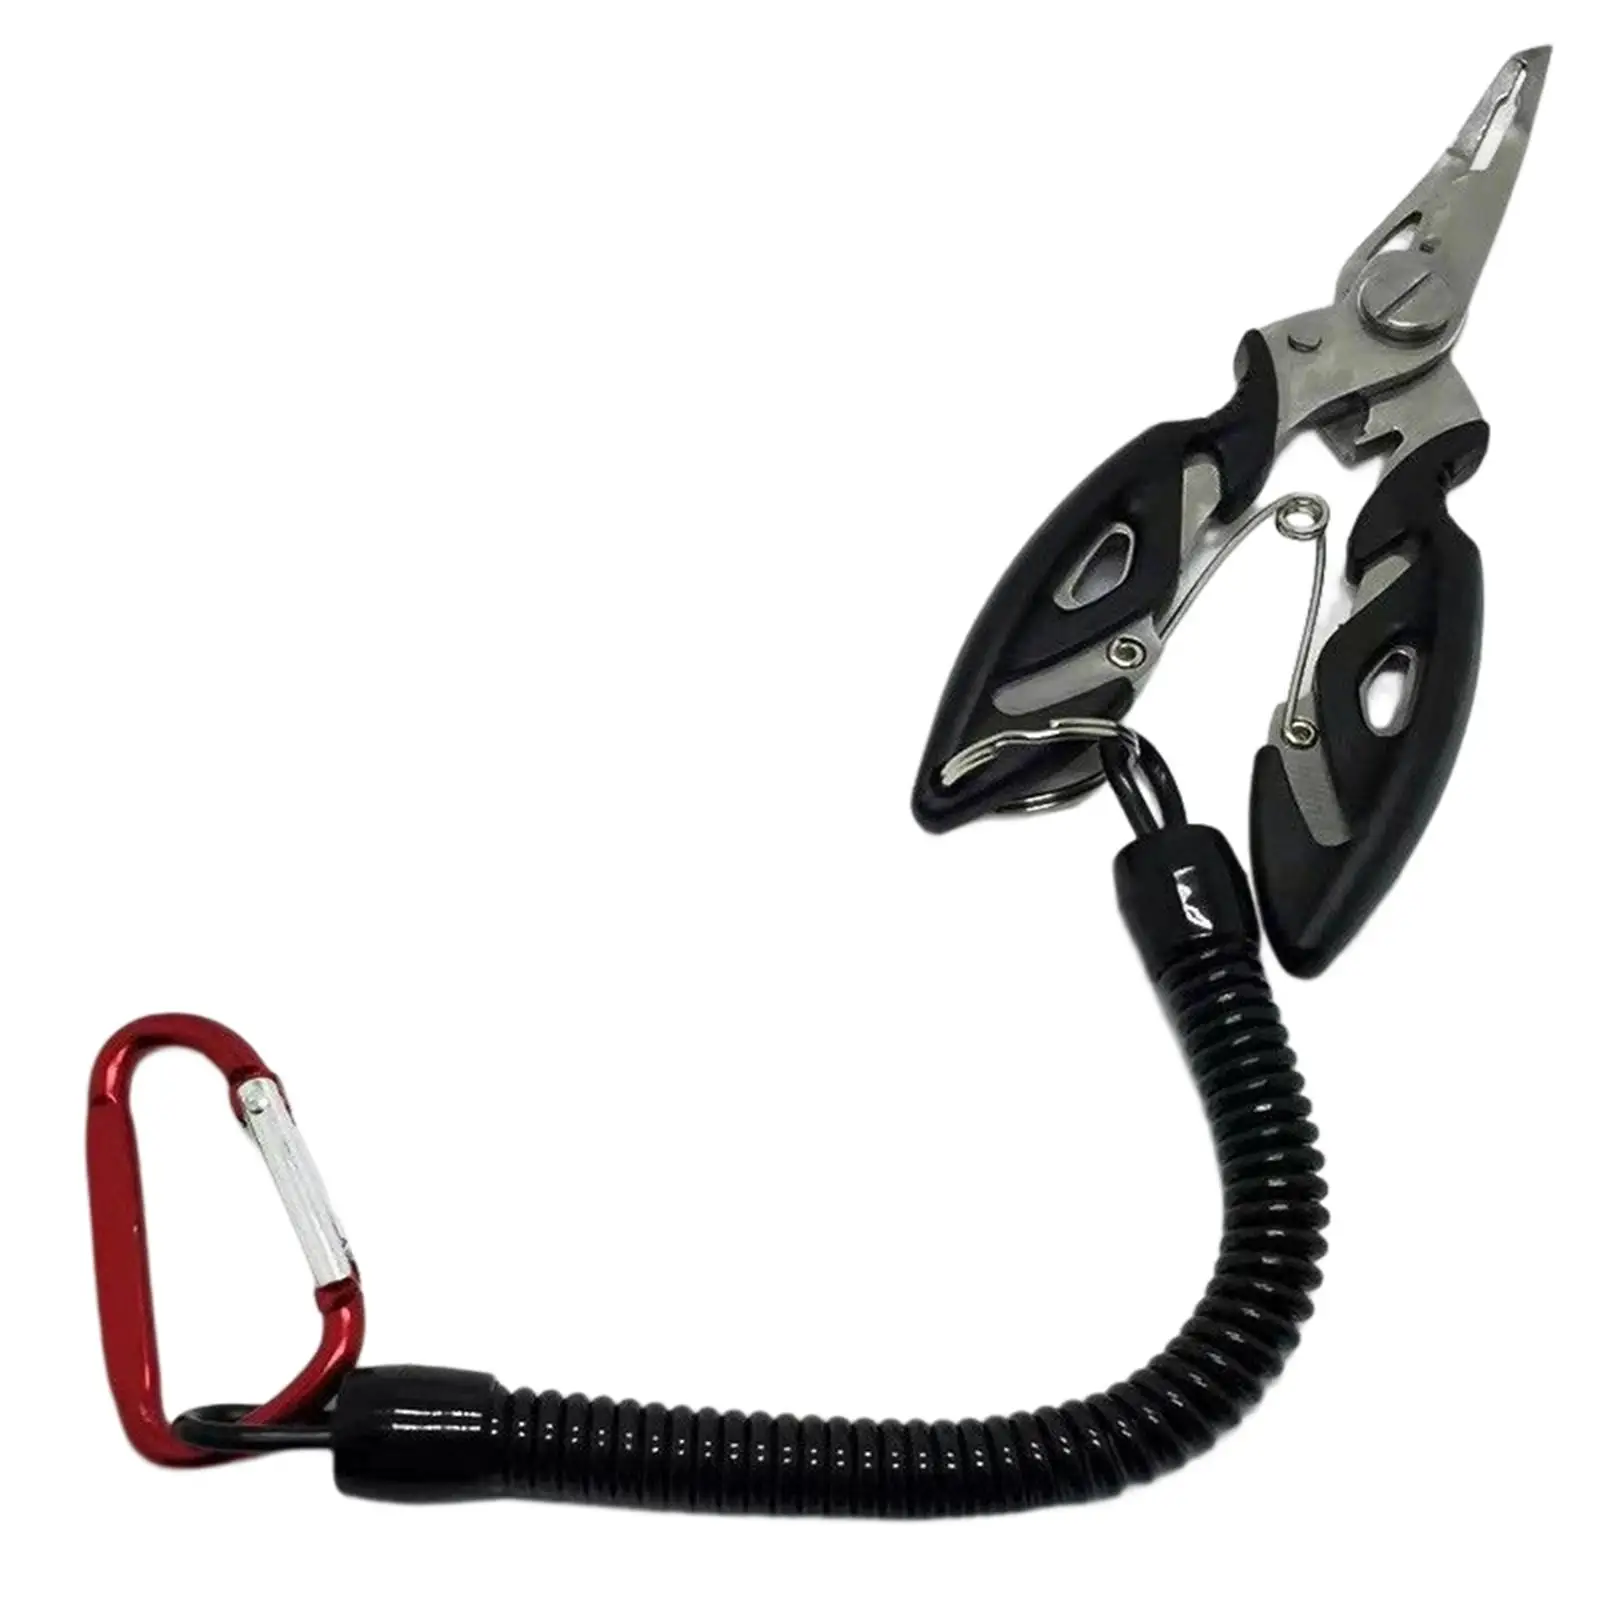 Portable Fishing Pliers Hook Remover with Lanyard Saltwater Freshwater Split Ring Pliers Fishing Accessories Equipment Gadget